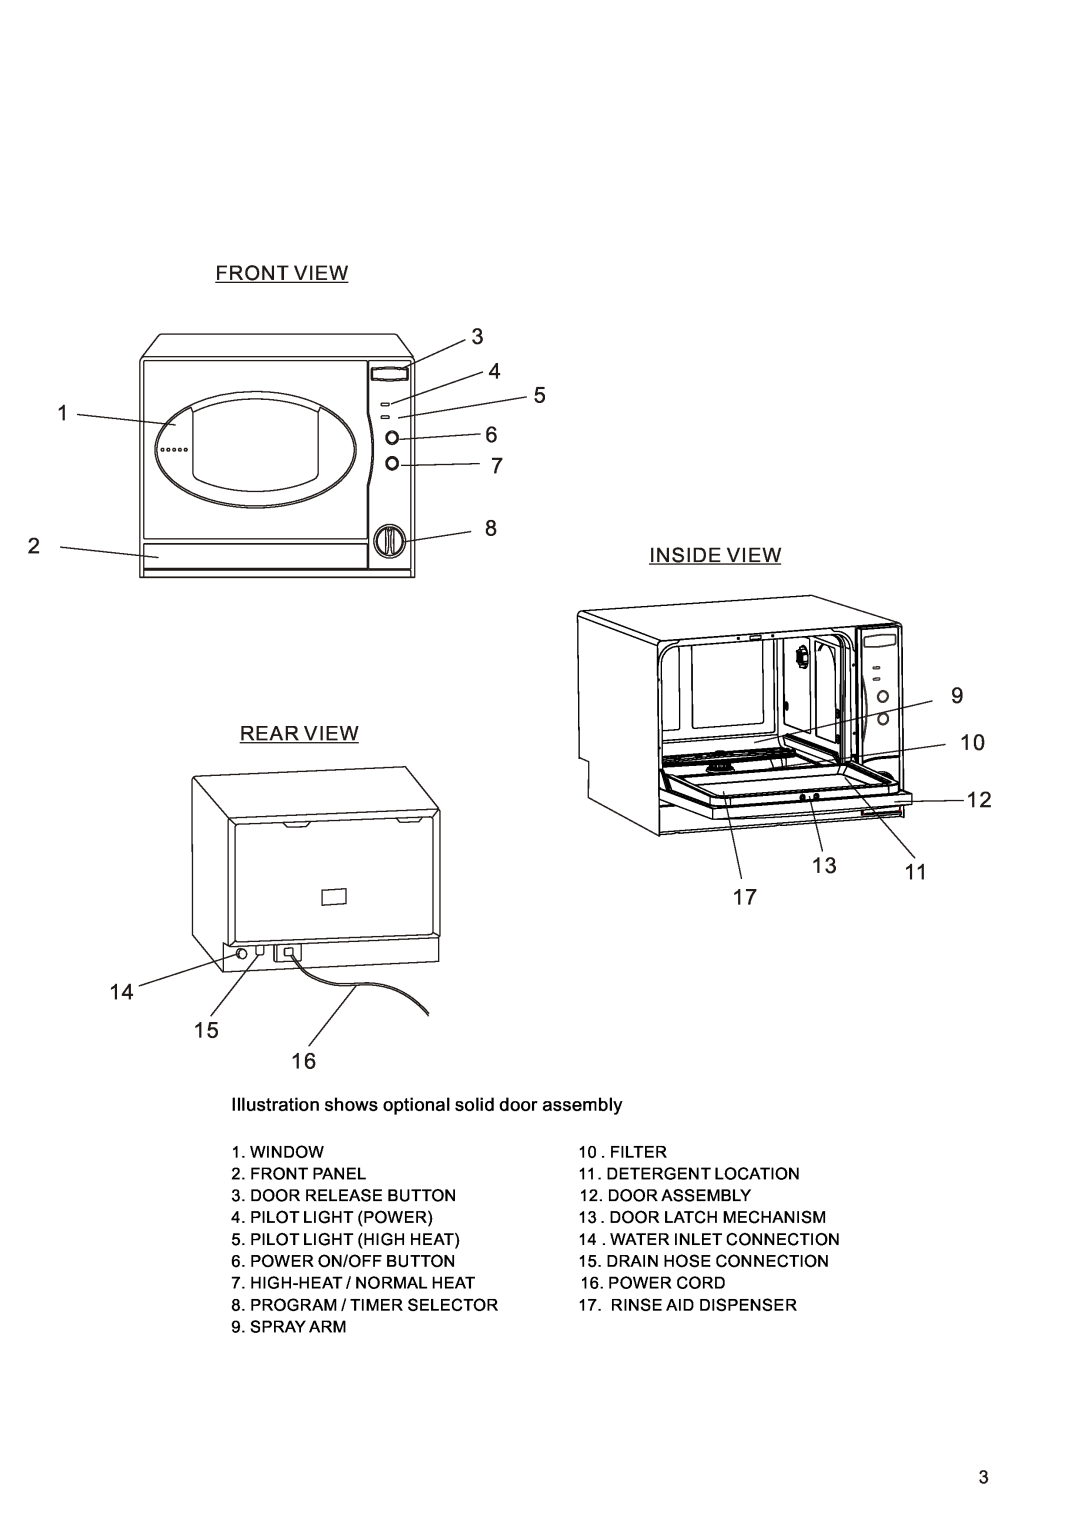 Equator CD400 owner manual Front View, Inside View, Rear View, Illustration shows optional solid door assembly 